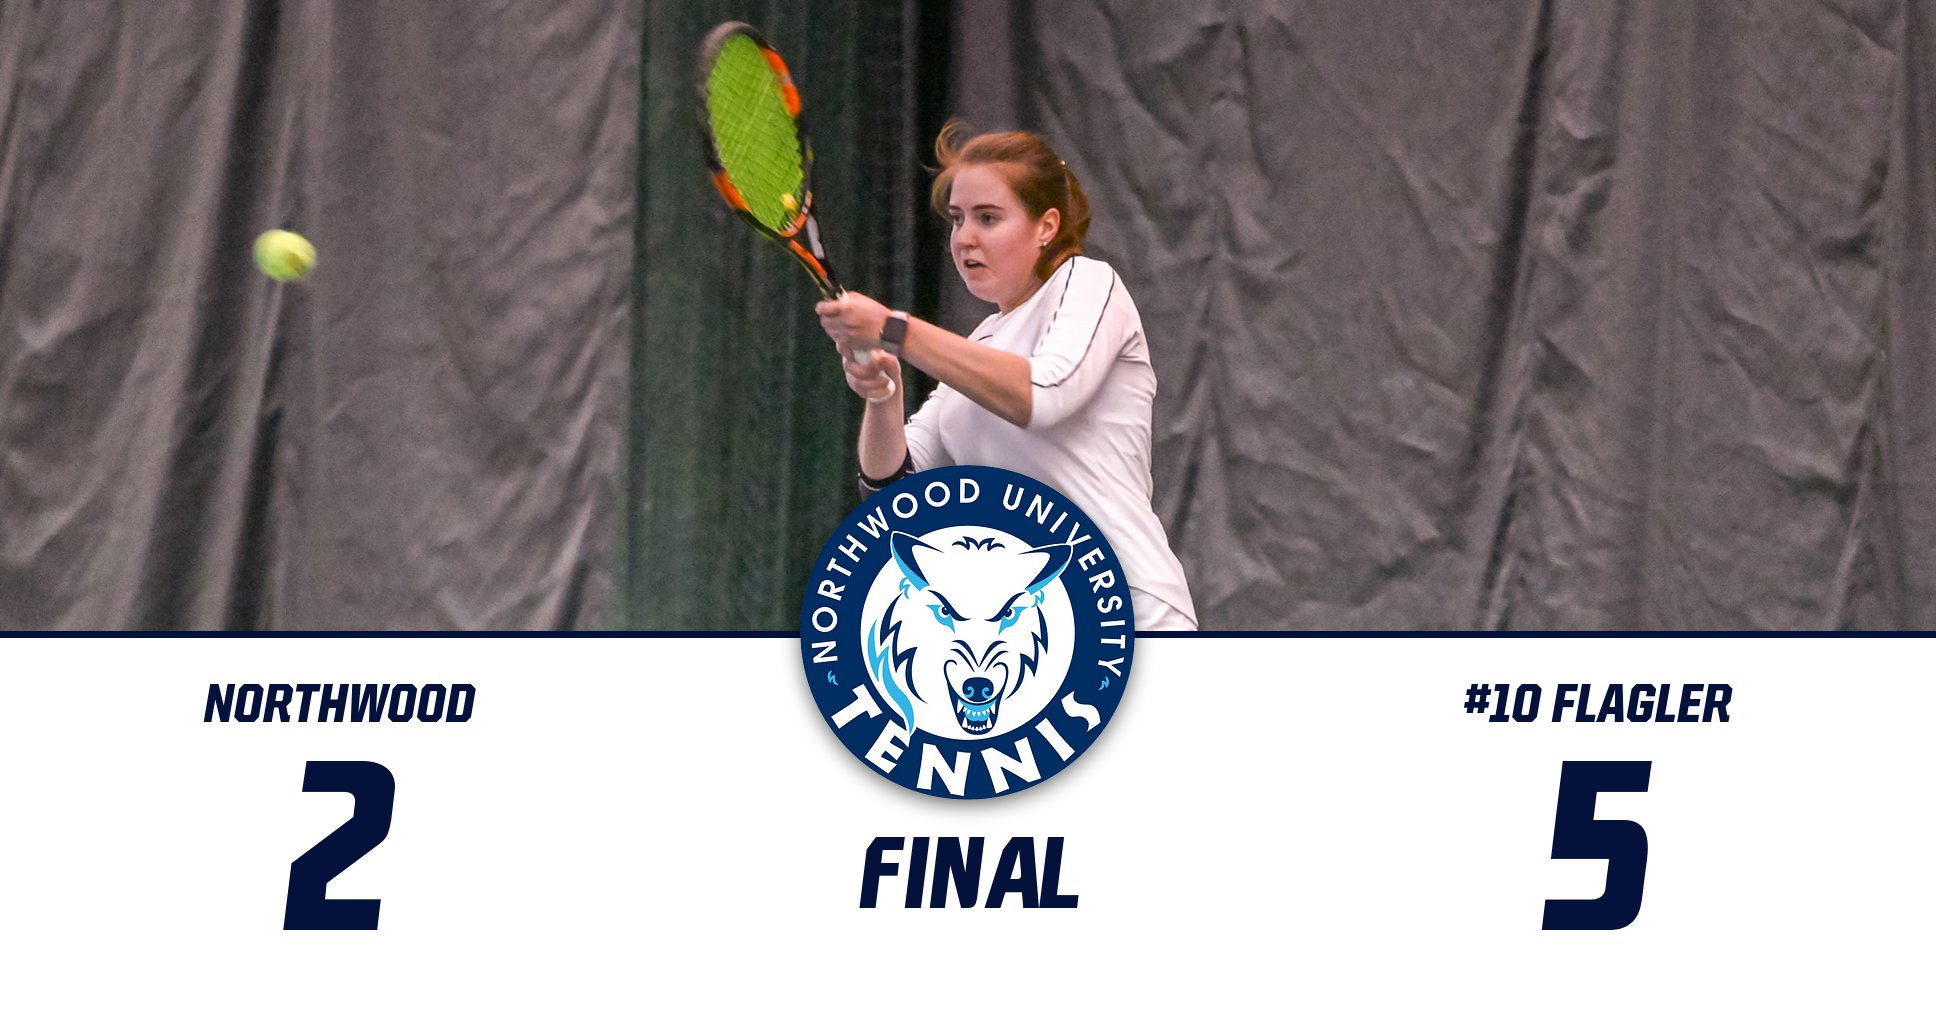 Women's Tennis Loses 5-2 Match To #10 Flagler